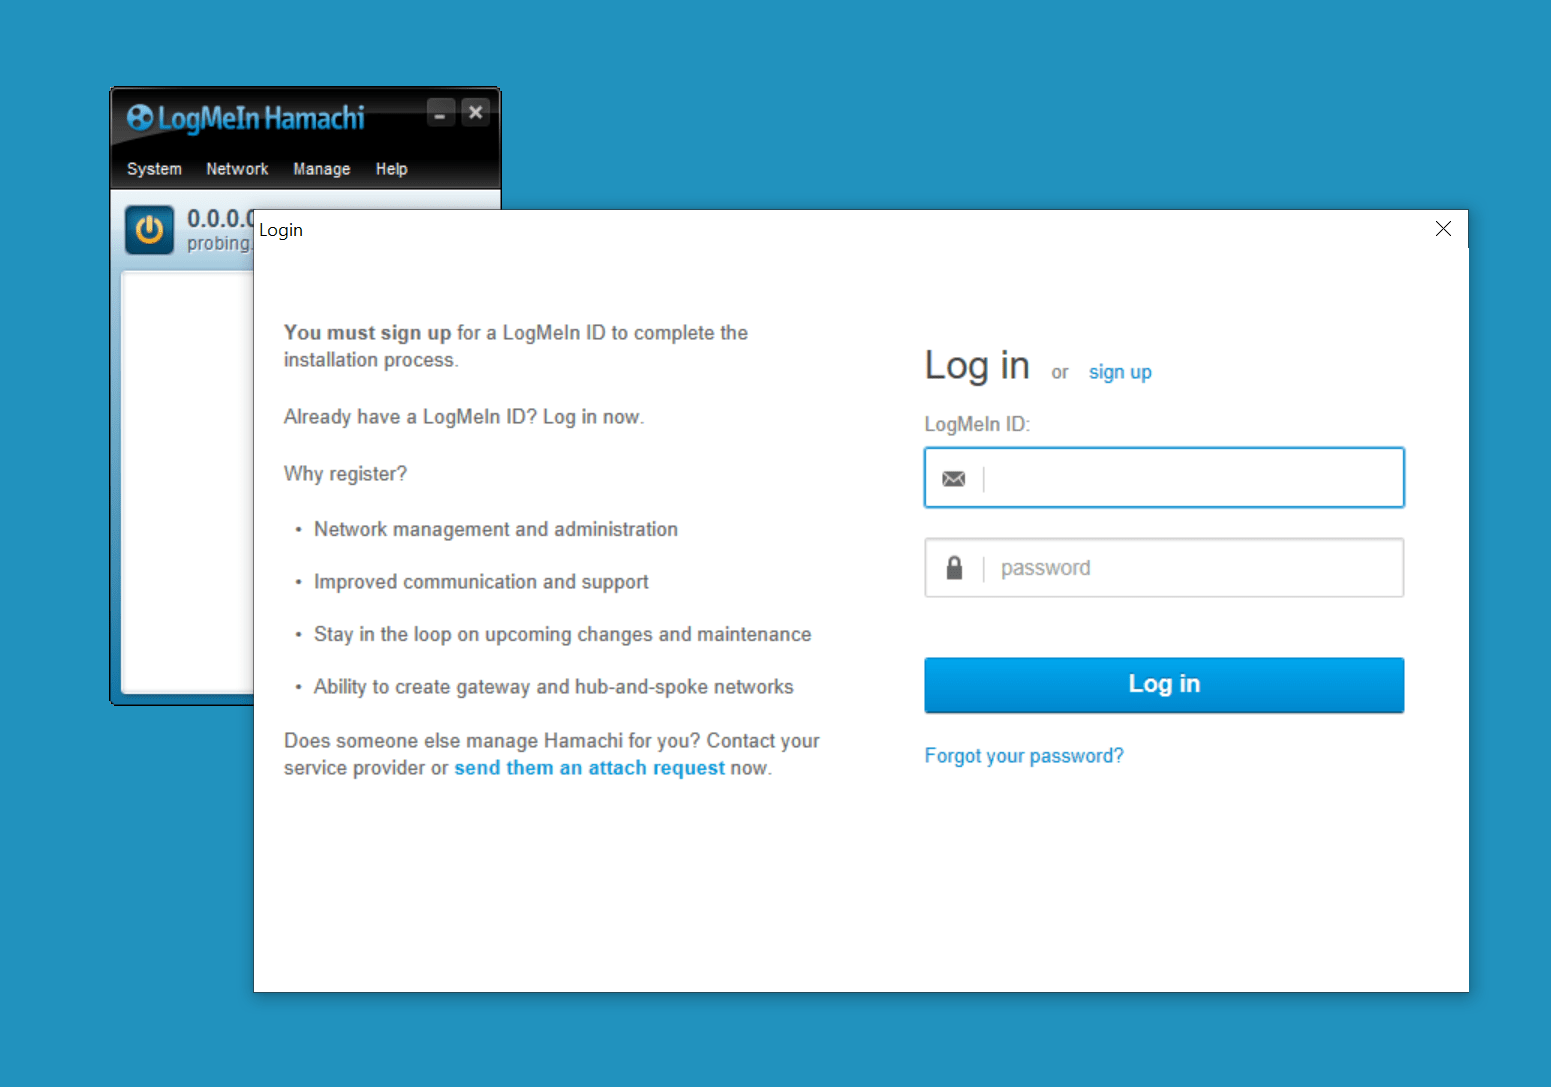 logmein hamachi for android